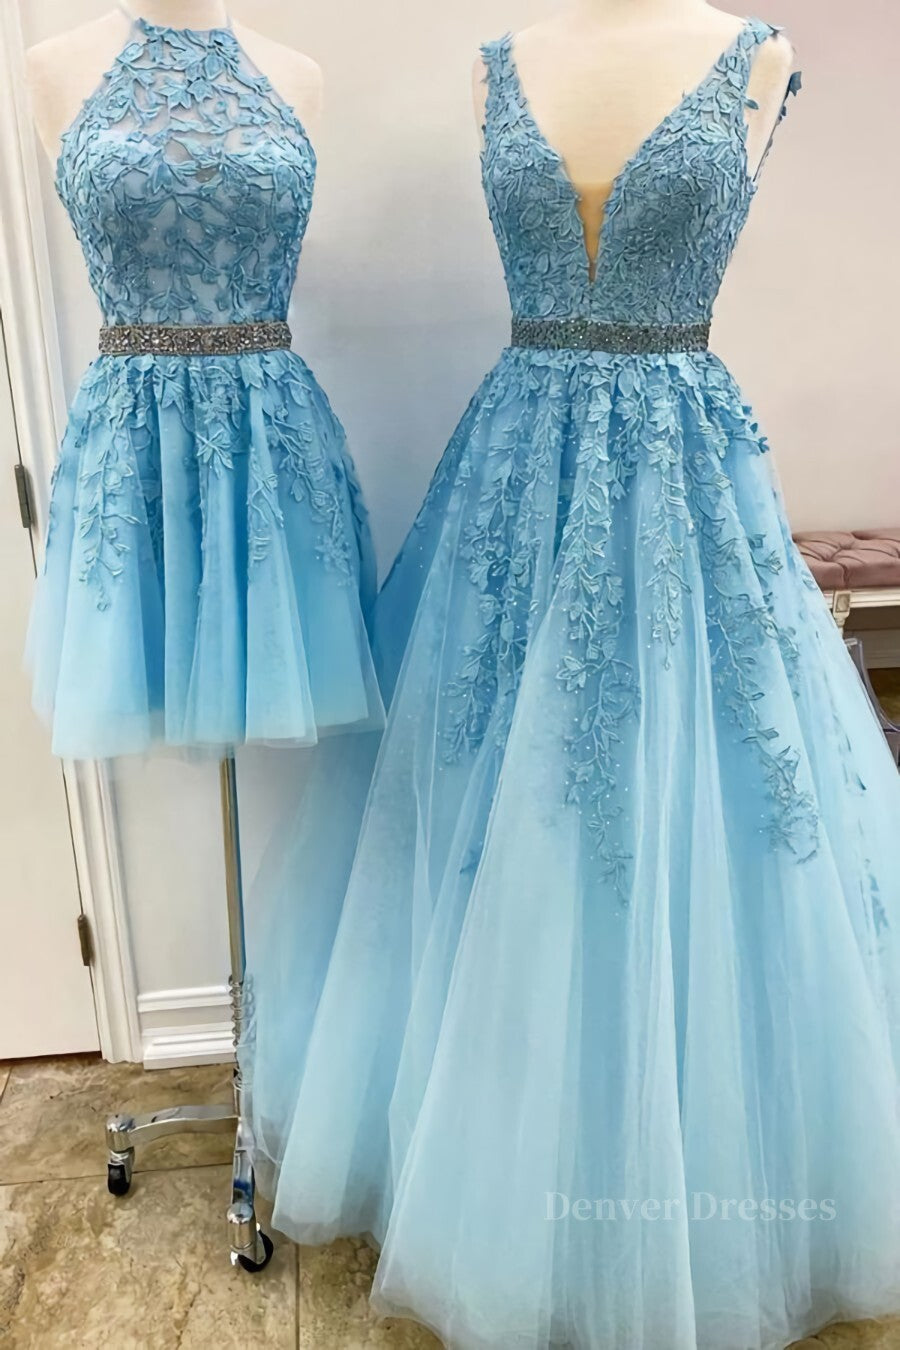 Prom Dresses Aesthetic, Blue Tulle Lace Prom Dresses, Blue Tulle Lace Formal Evening Dresses